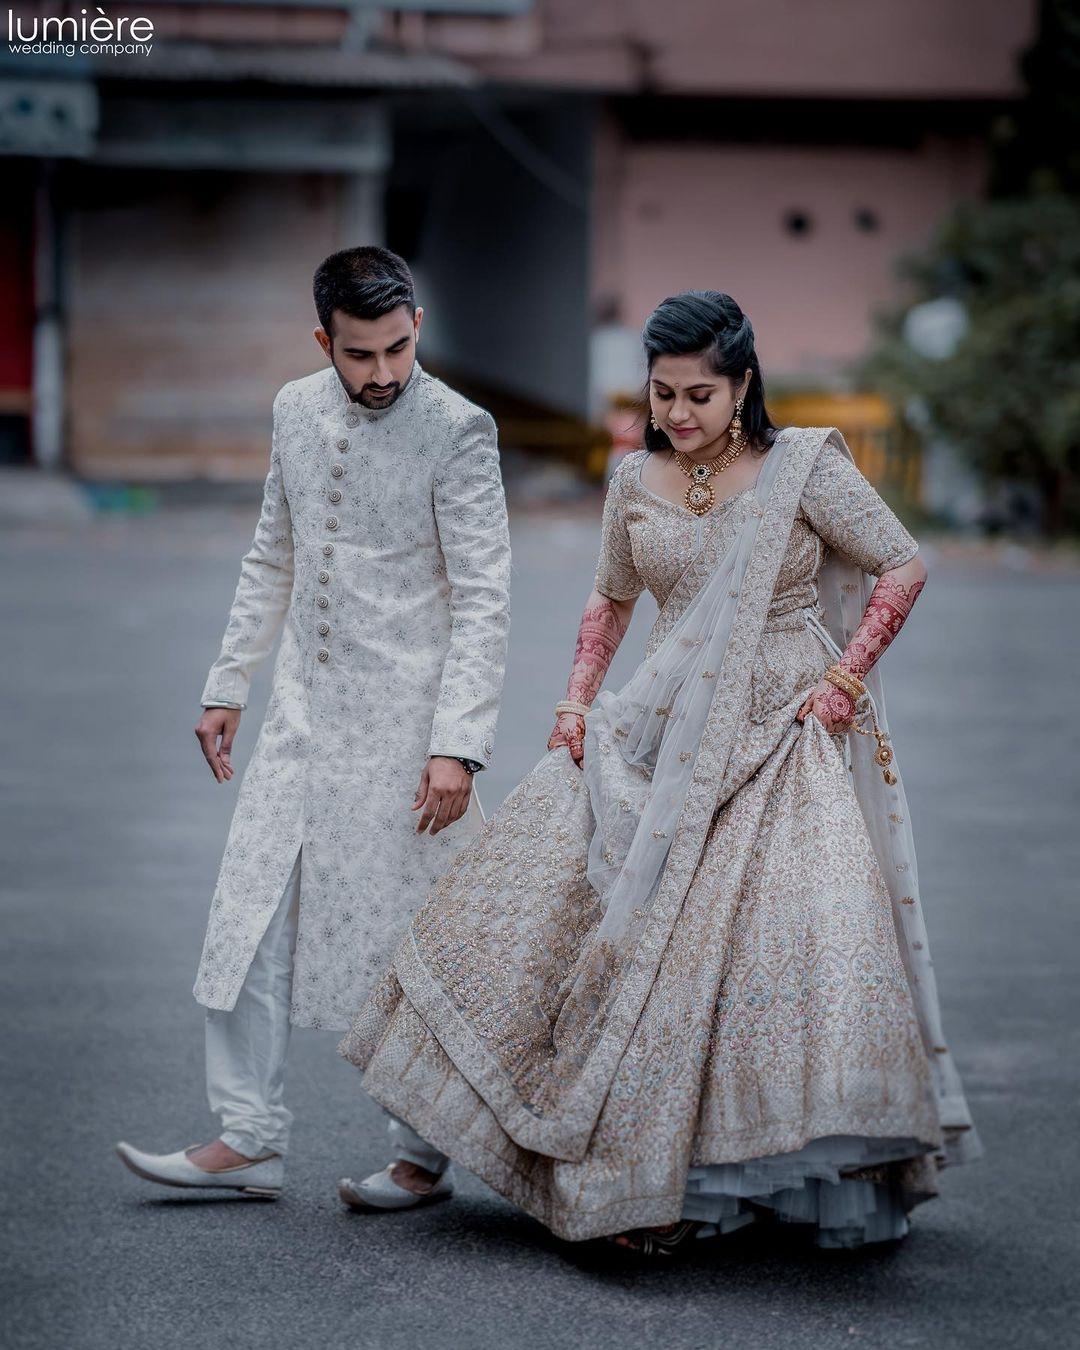 What can be the best outfit to wear at an Indian wedding reception? - Quora